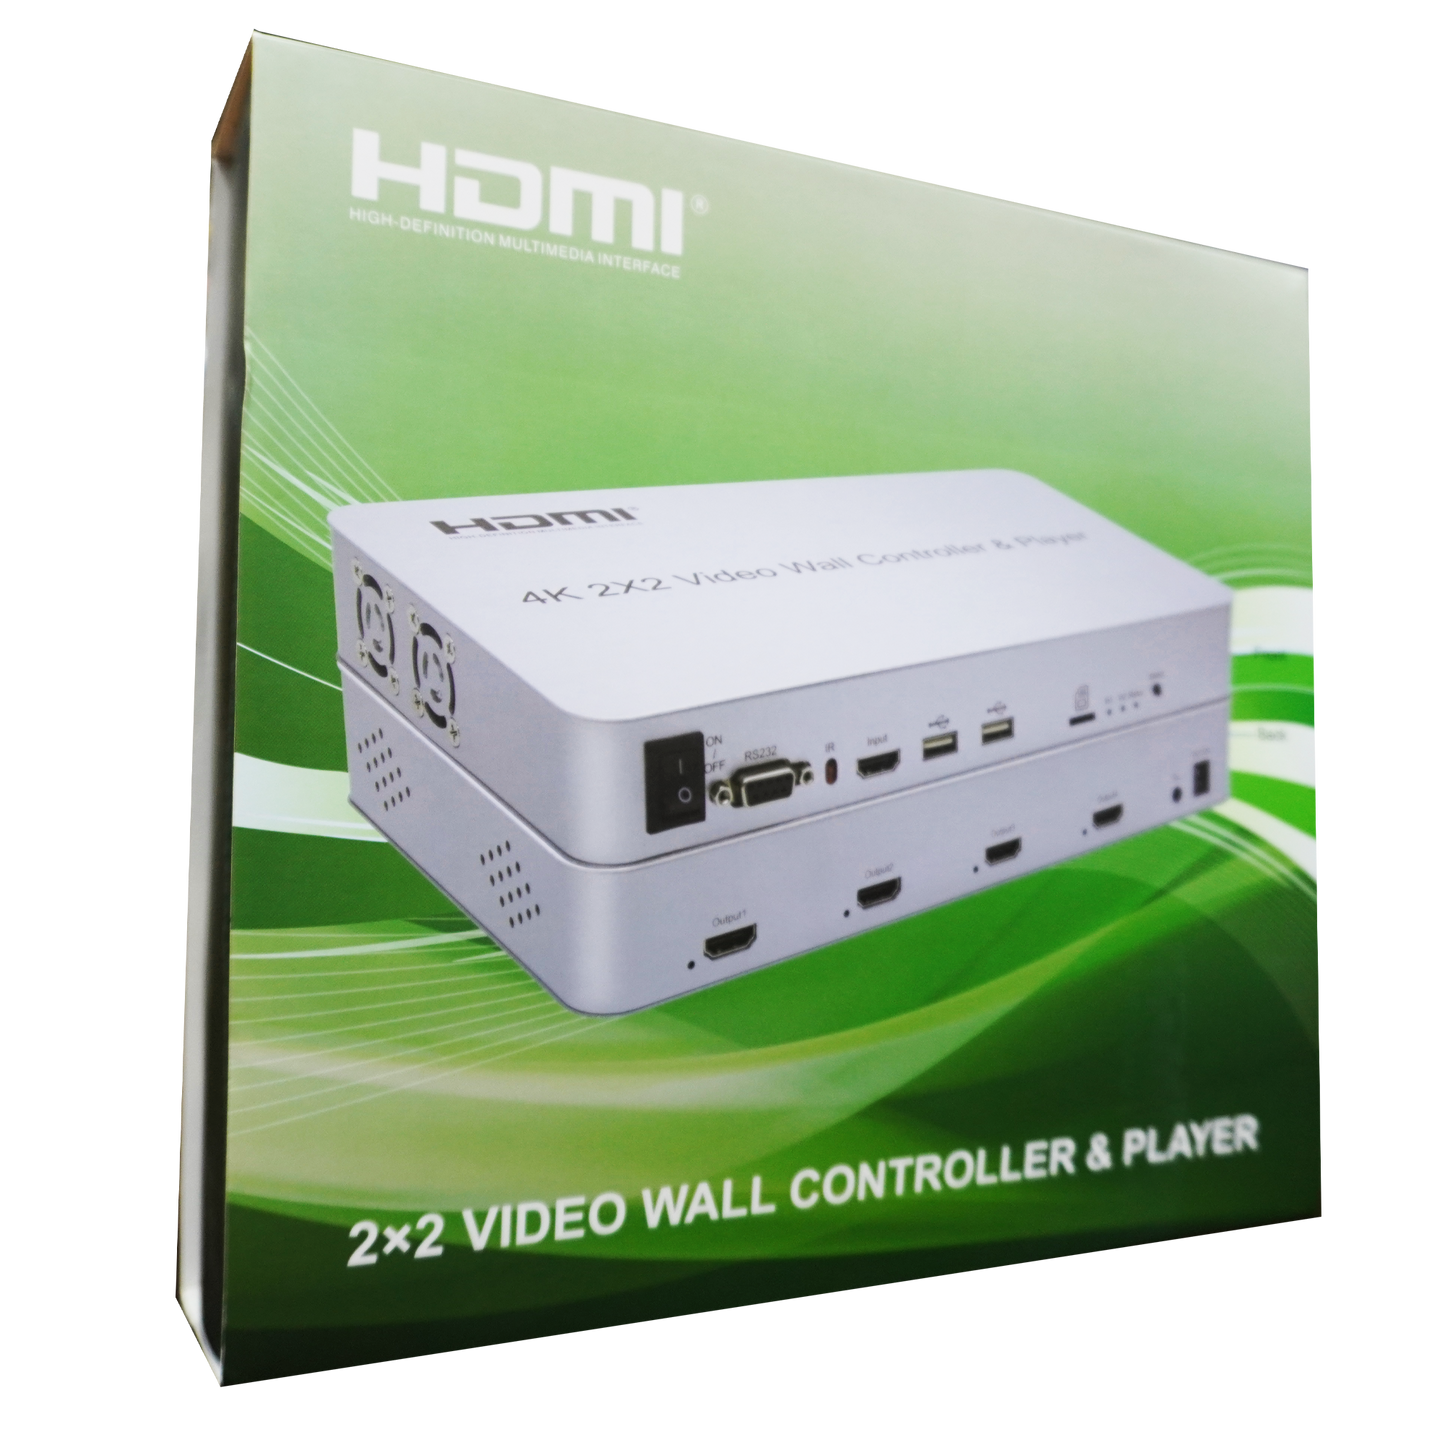 2X2 VIDEO WALL CONTROLLER & PLAYER